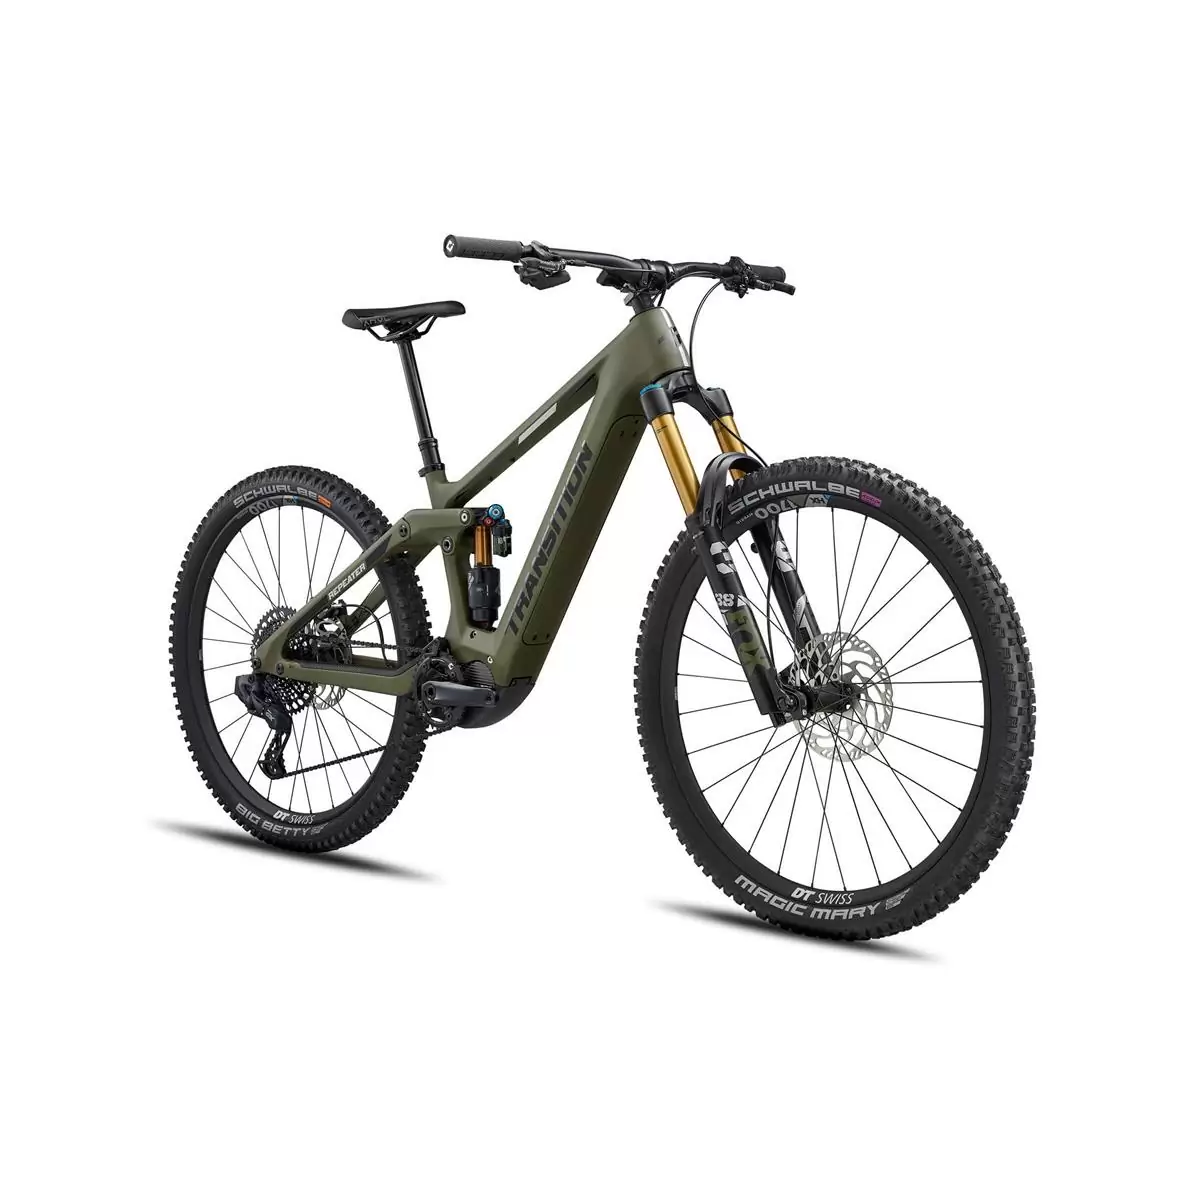 Répéteur Carbone AXS 29'' 160mm 12v 630Wh Shimano EP8 Mossy Green Taille XL #1